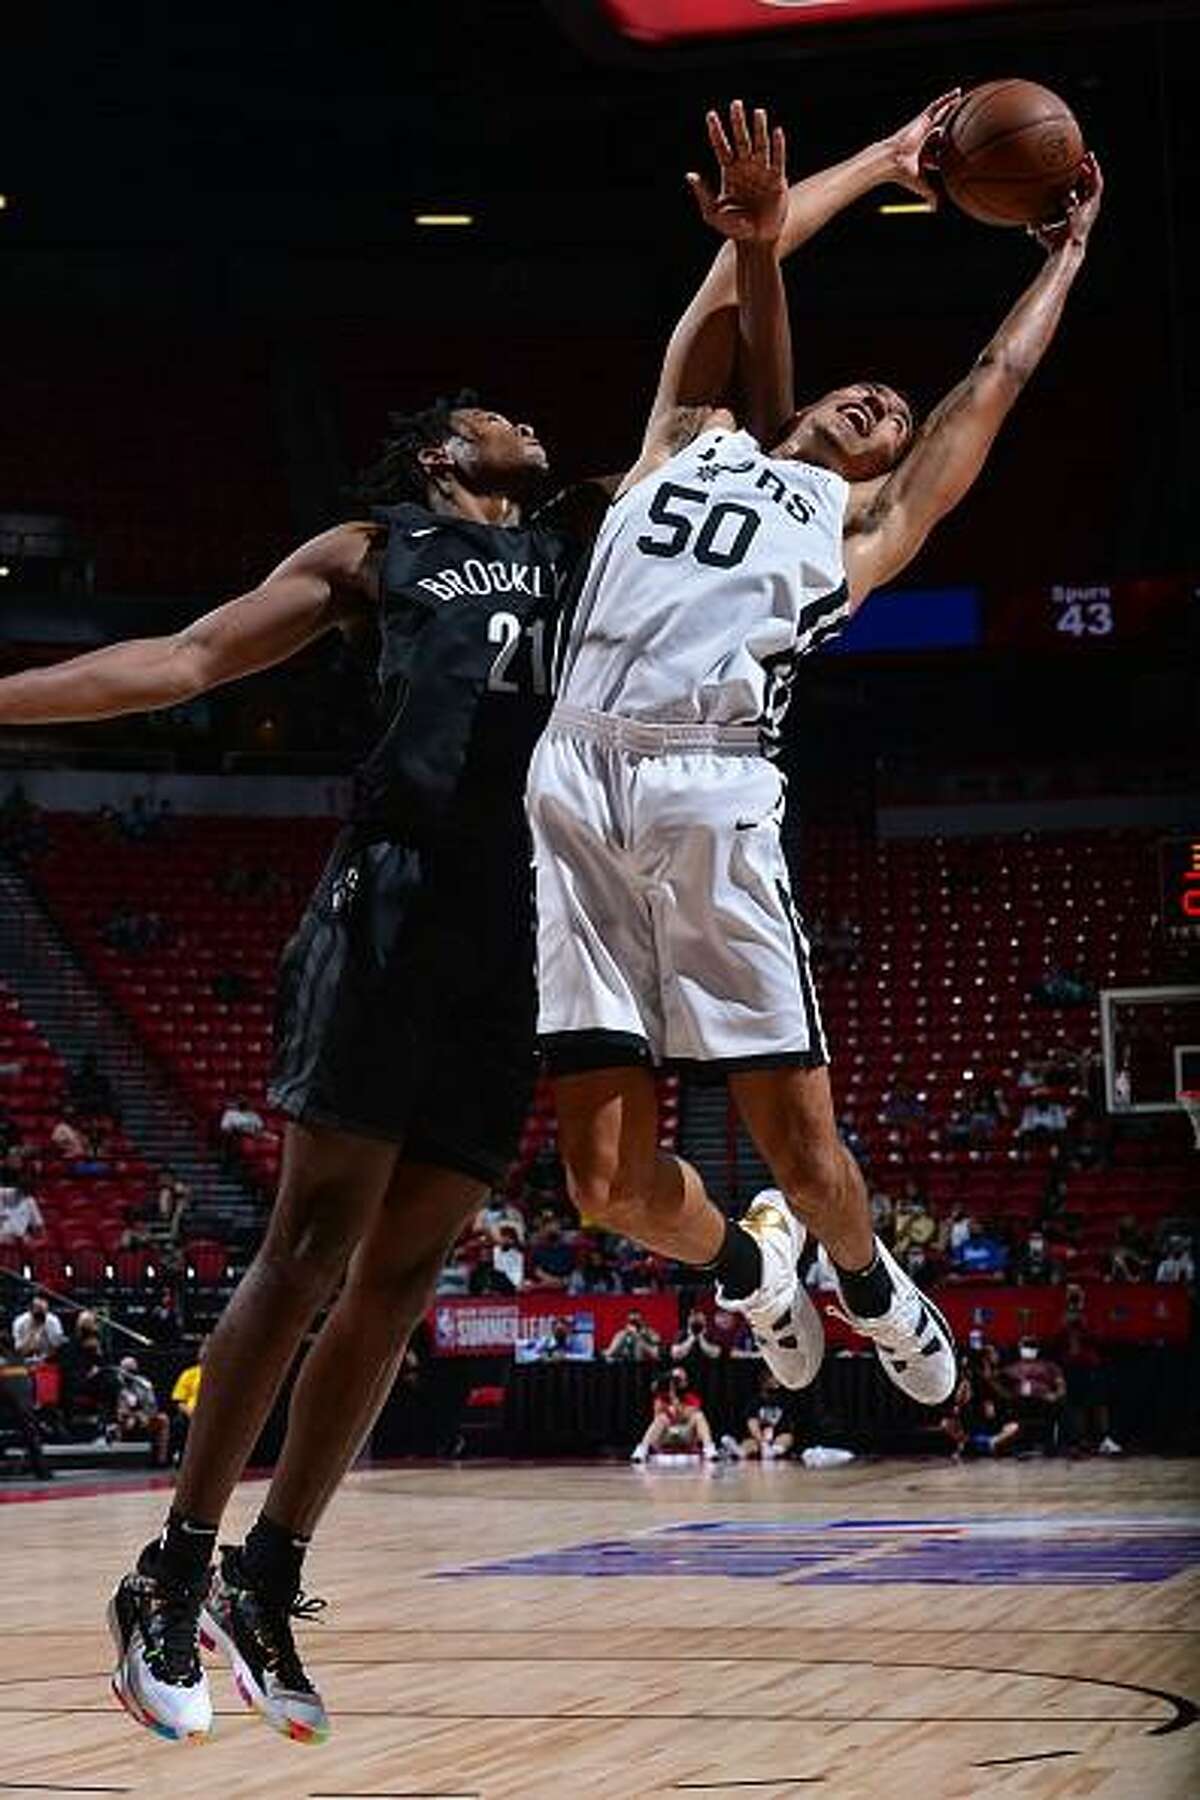 Justin Robinson #50 of the San Antonio Spurs rebounds the ball against the Brooklyn Nets during the 2021 Las Vegas Summer League on August 15, 2021 at the Thomas & Mack Center in Las Vegas, Nevada.